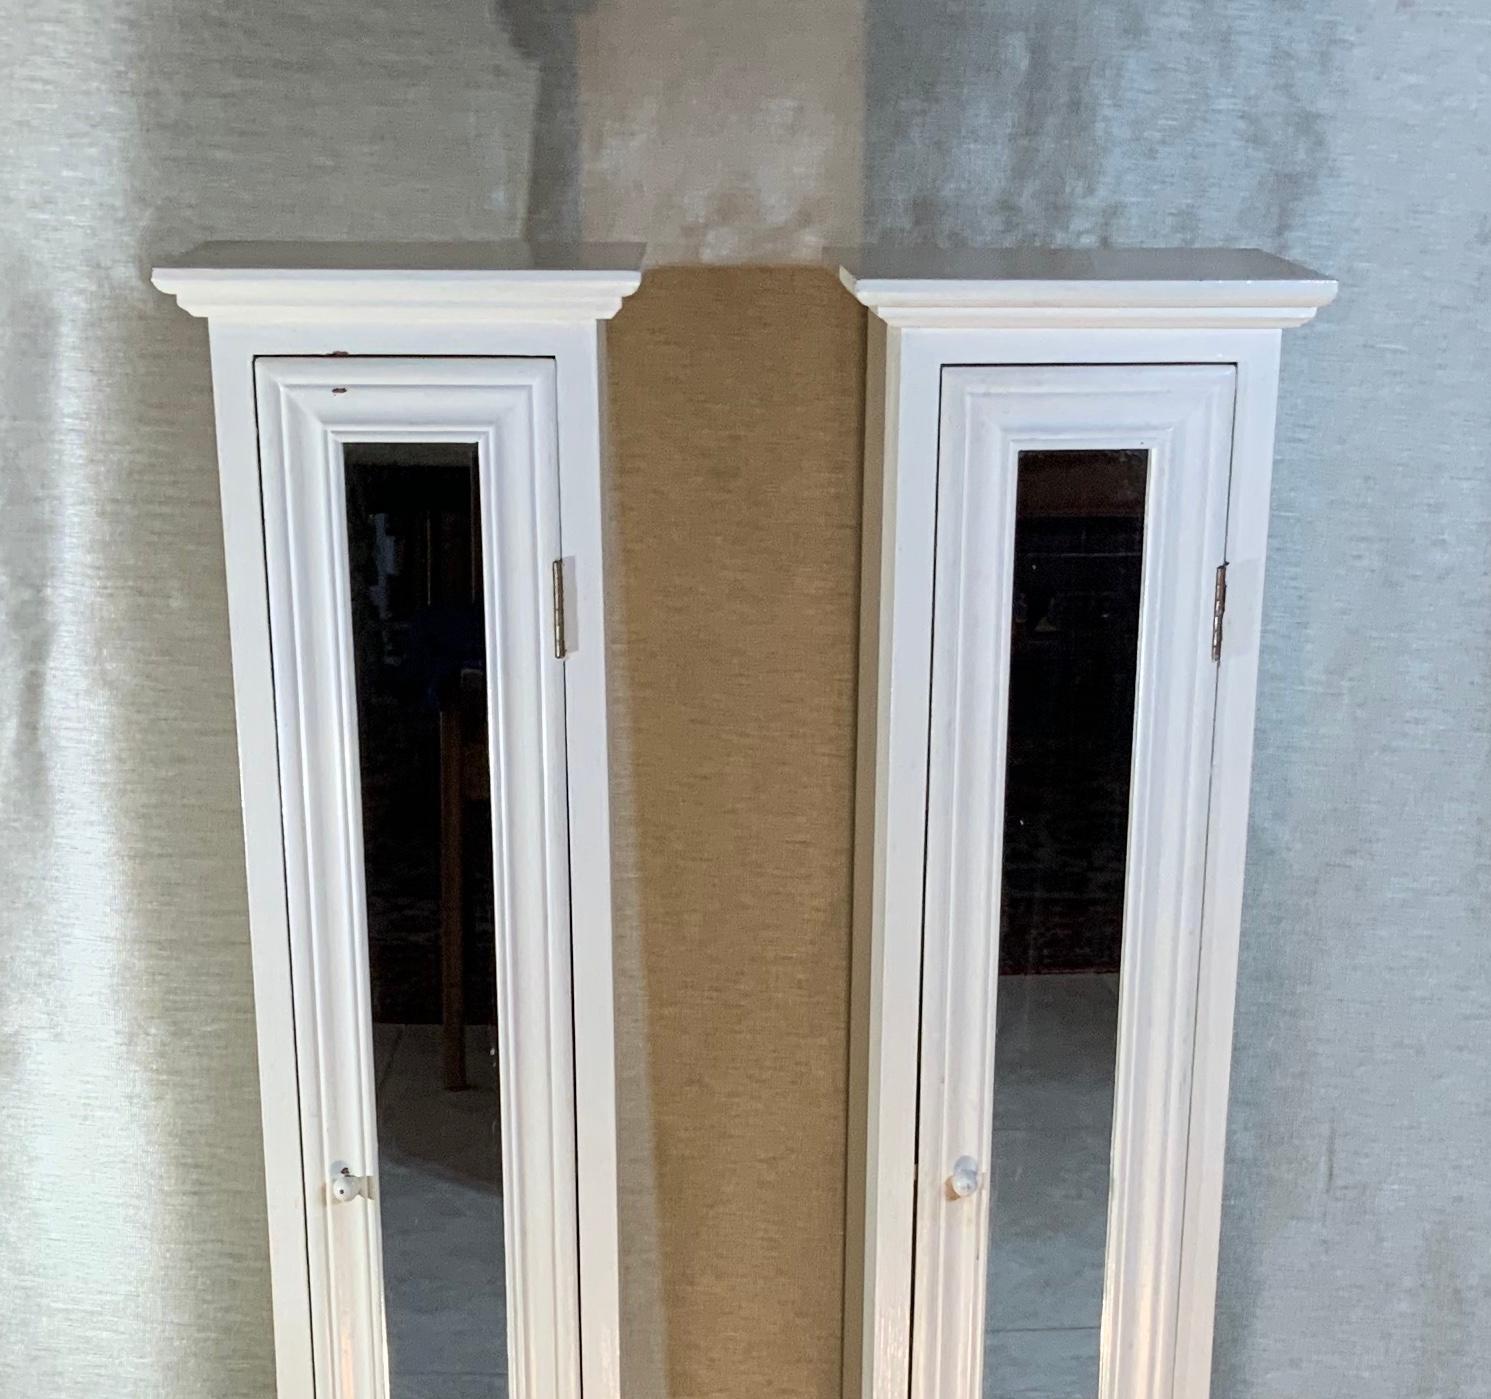 Pair of decorative custom cabinets made of solid wood, front door with mirror glass. Each cabinet is divided by four compartments each compartment size is: 8” high x 5”.5 wide x 5”.75 deep. Great for storage use in small Spaces.
Need some tender